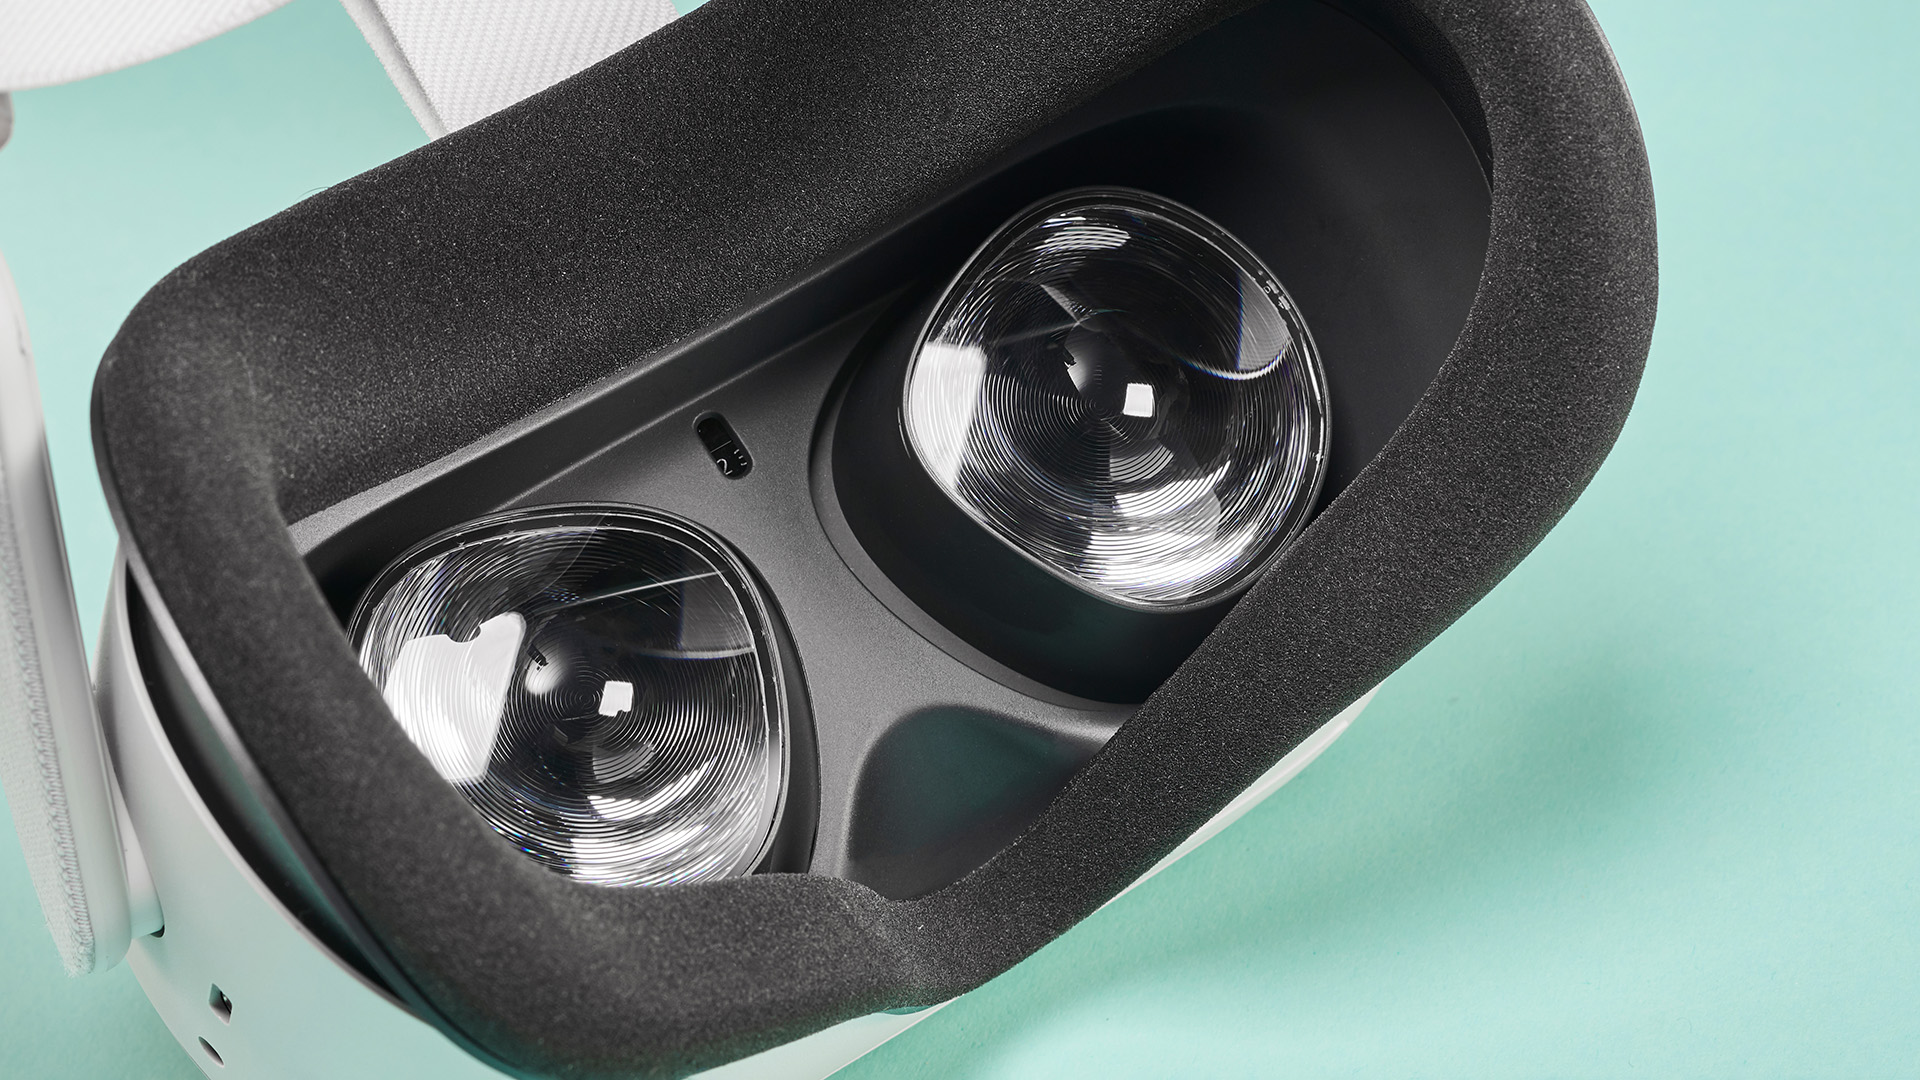  Meta will launch next generation Quest VR headset next year 